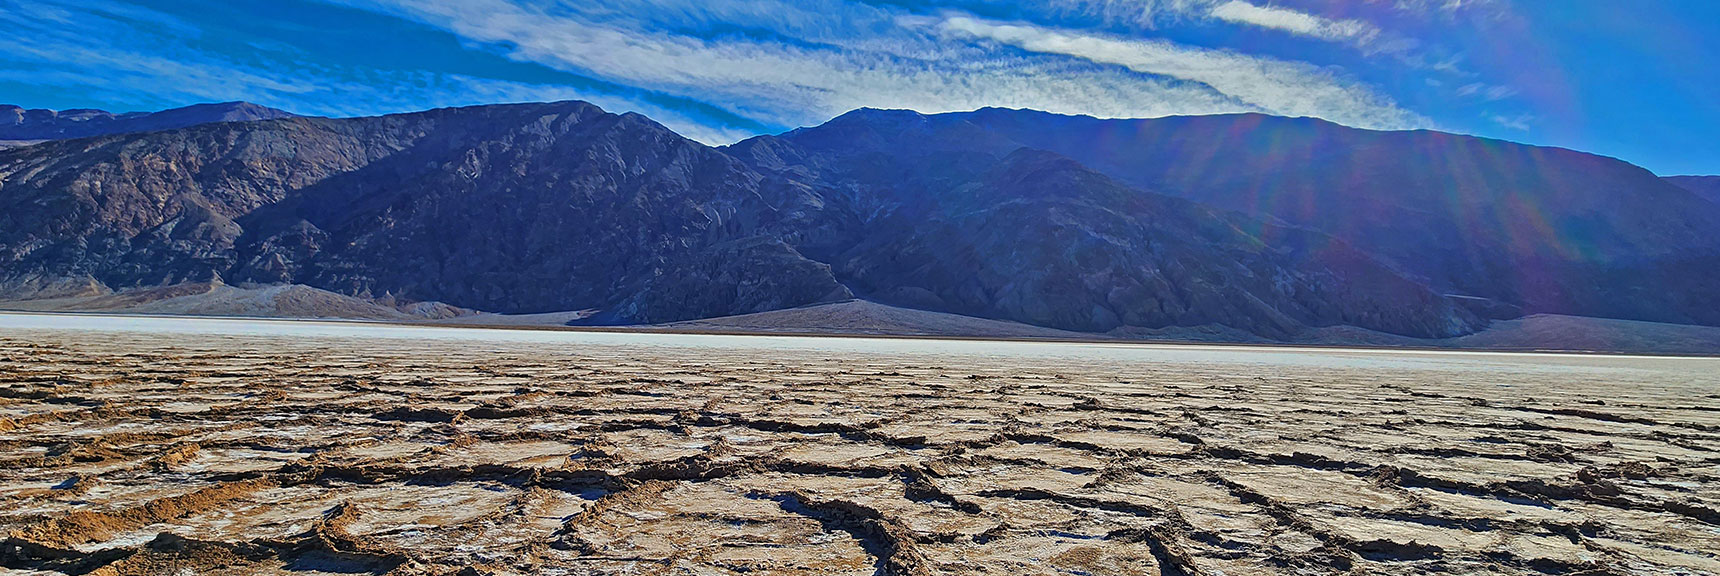 View East Toward the Black Mountains, Badwater and Dante's View | Death Valley Crossing | Death Valley National Park, California | David Smith | LasVegasAreaTrails.com